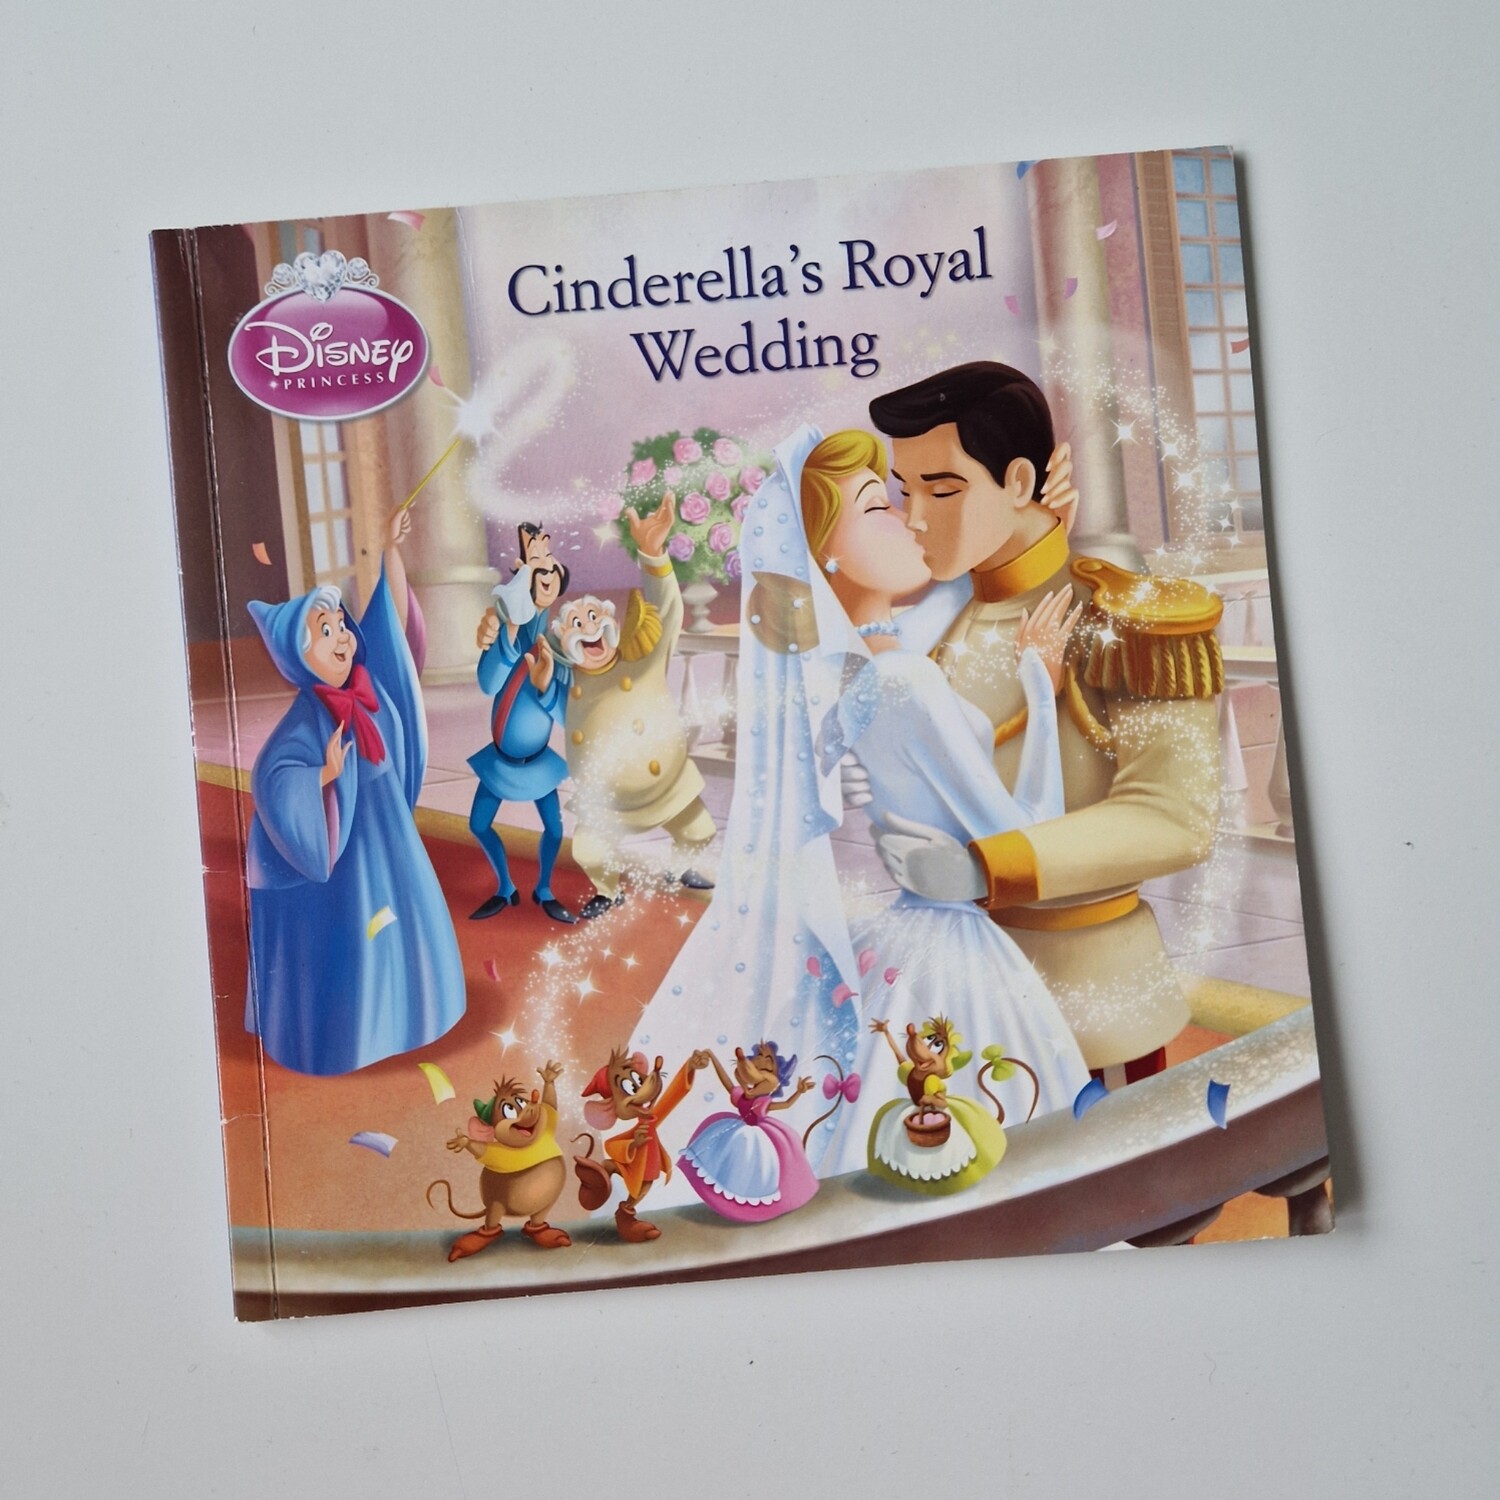 Cinderella's Royal Wedding Notebook - made from a paperback book